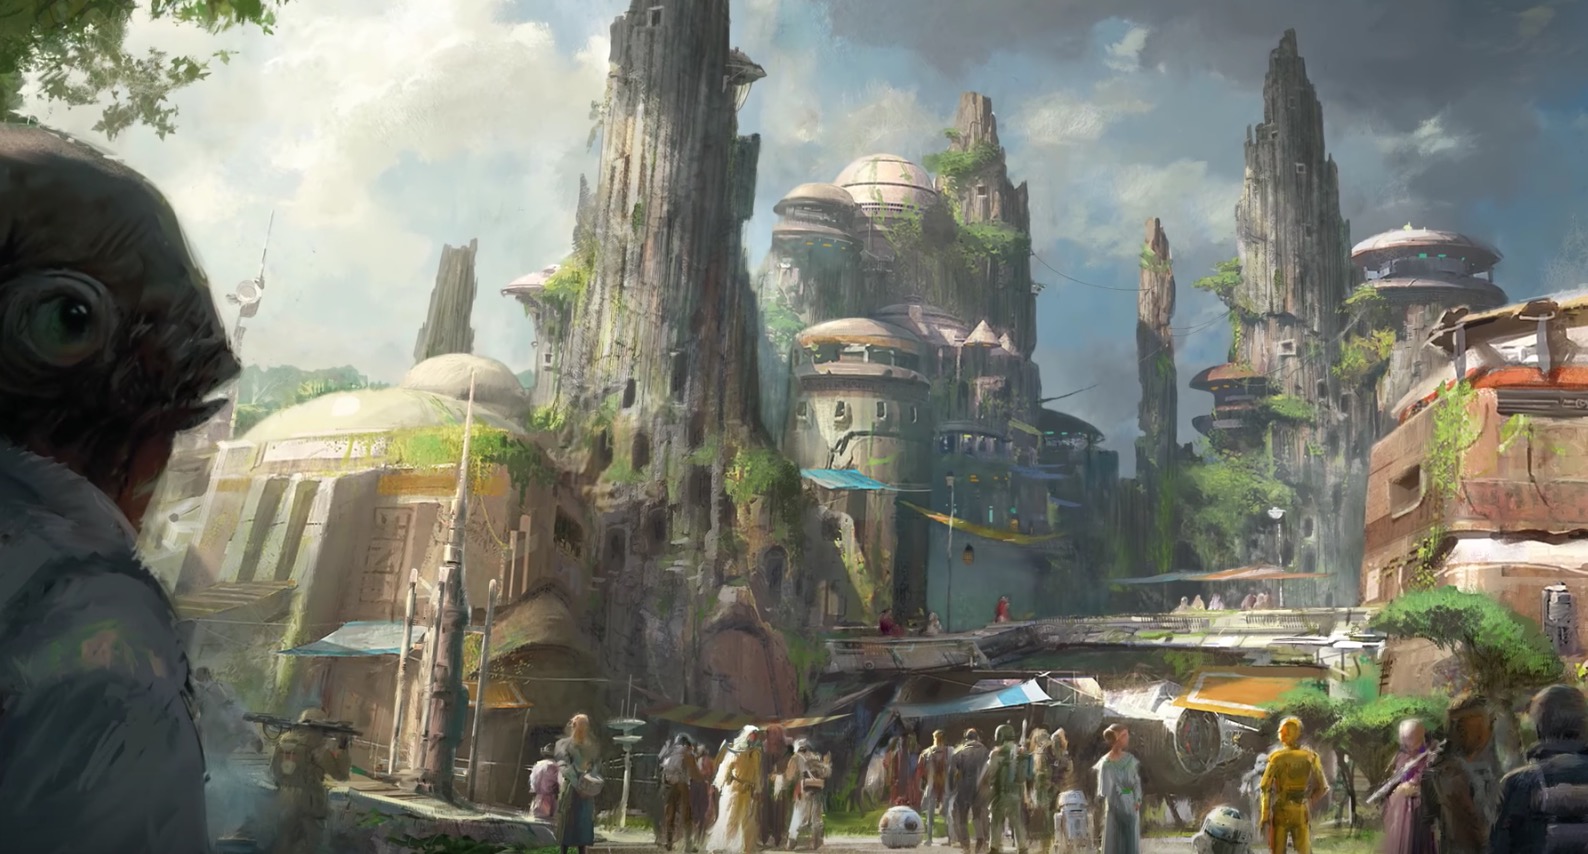 Park based on Star Wars will be similar to the interactive role-play